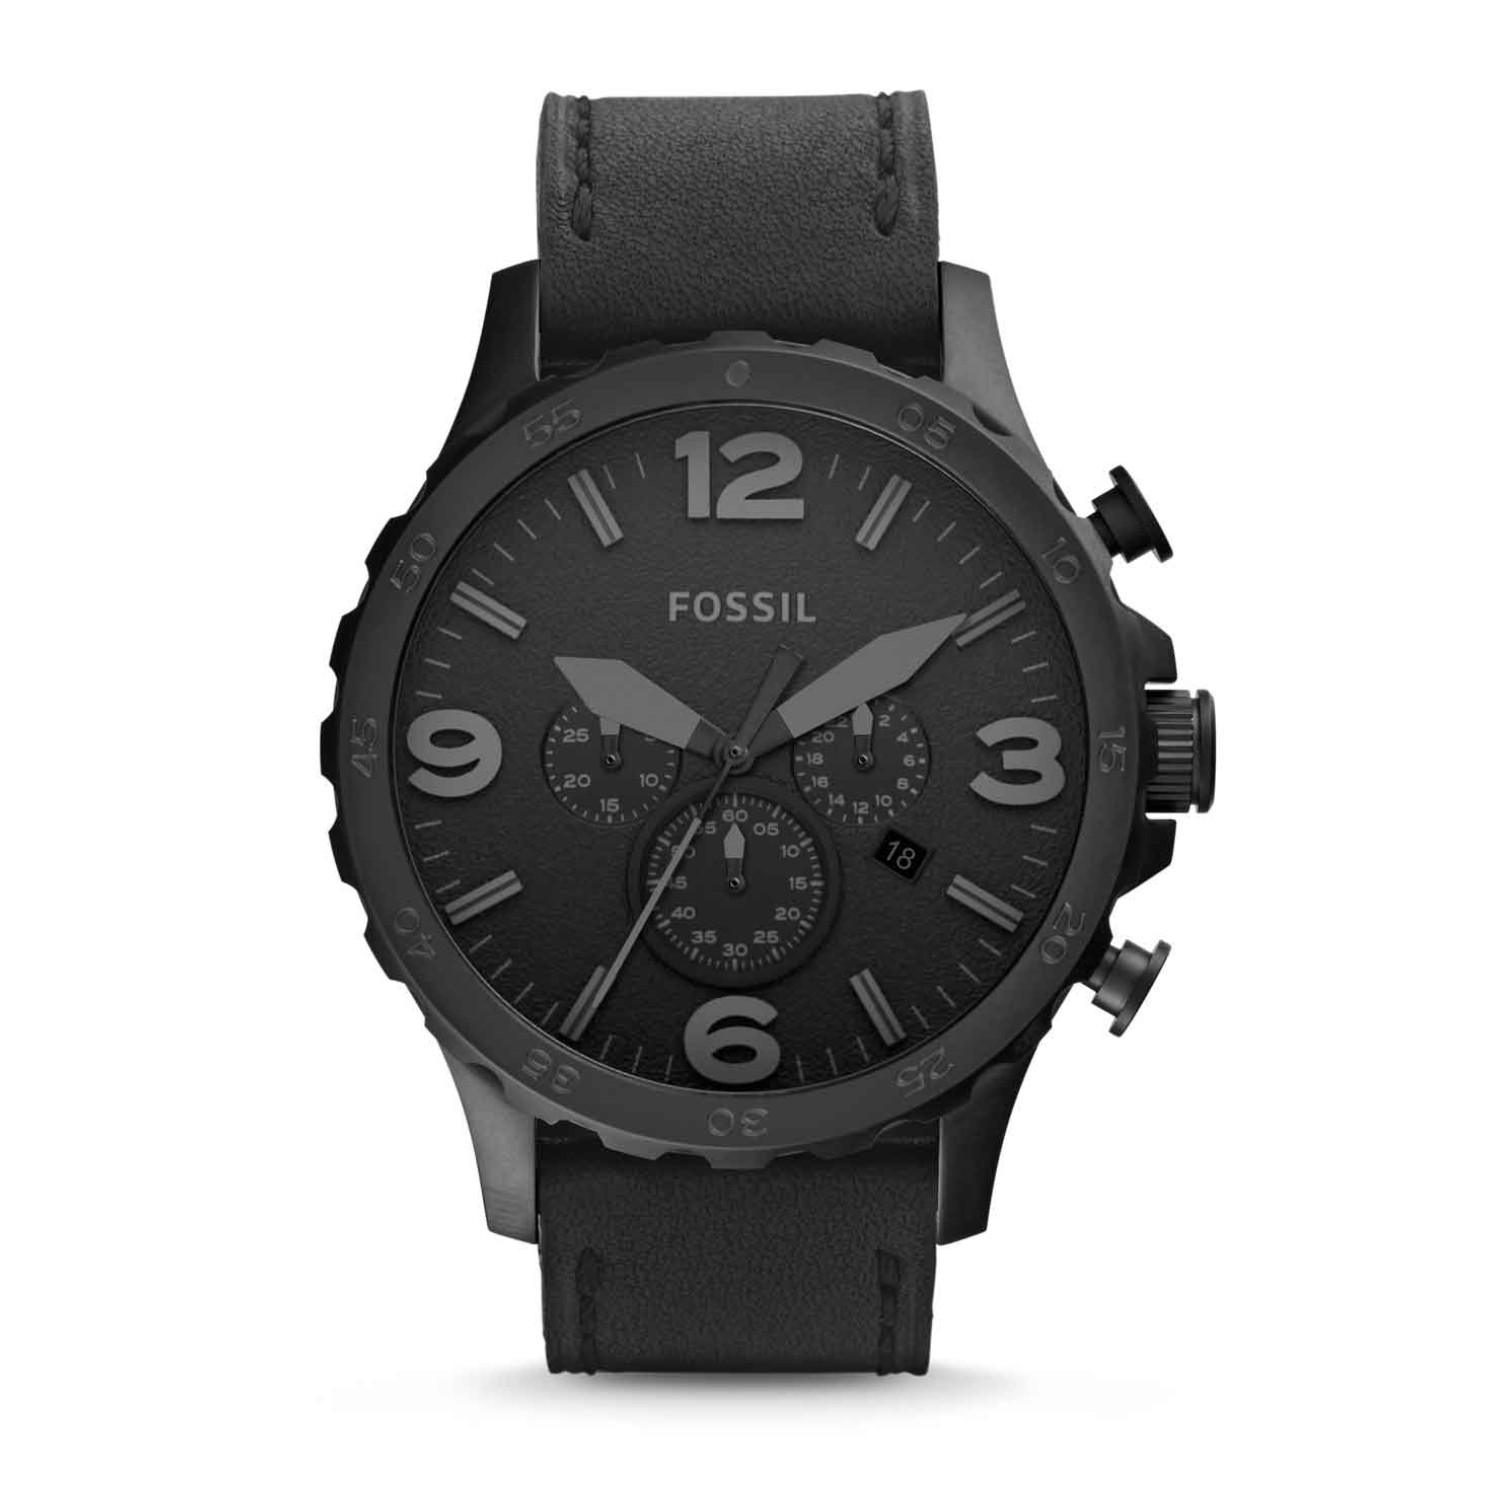 JR1354 Fossil Nate Chronograph Black Leather Watch. Add some military-inspired style to your wrist with our matte black stainless steel watch. A casual black leather strap and gray indexes add instant polish to any look. This Nate watch also features a ch